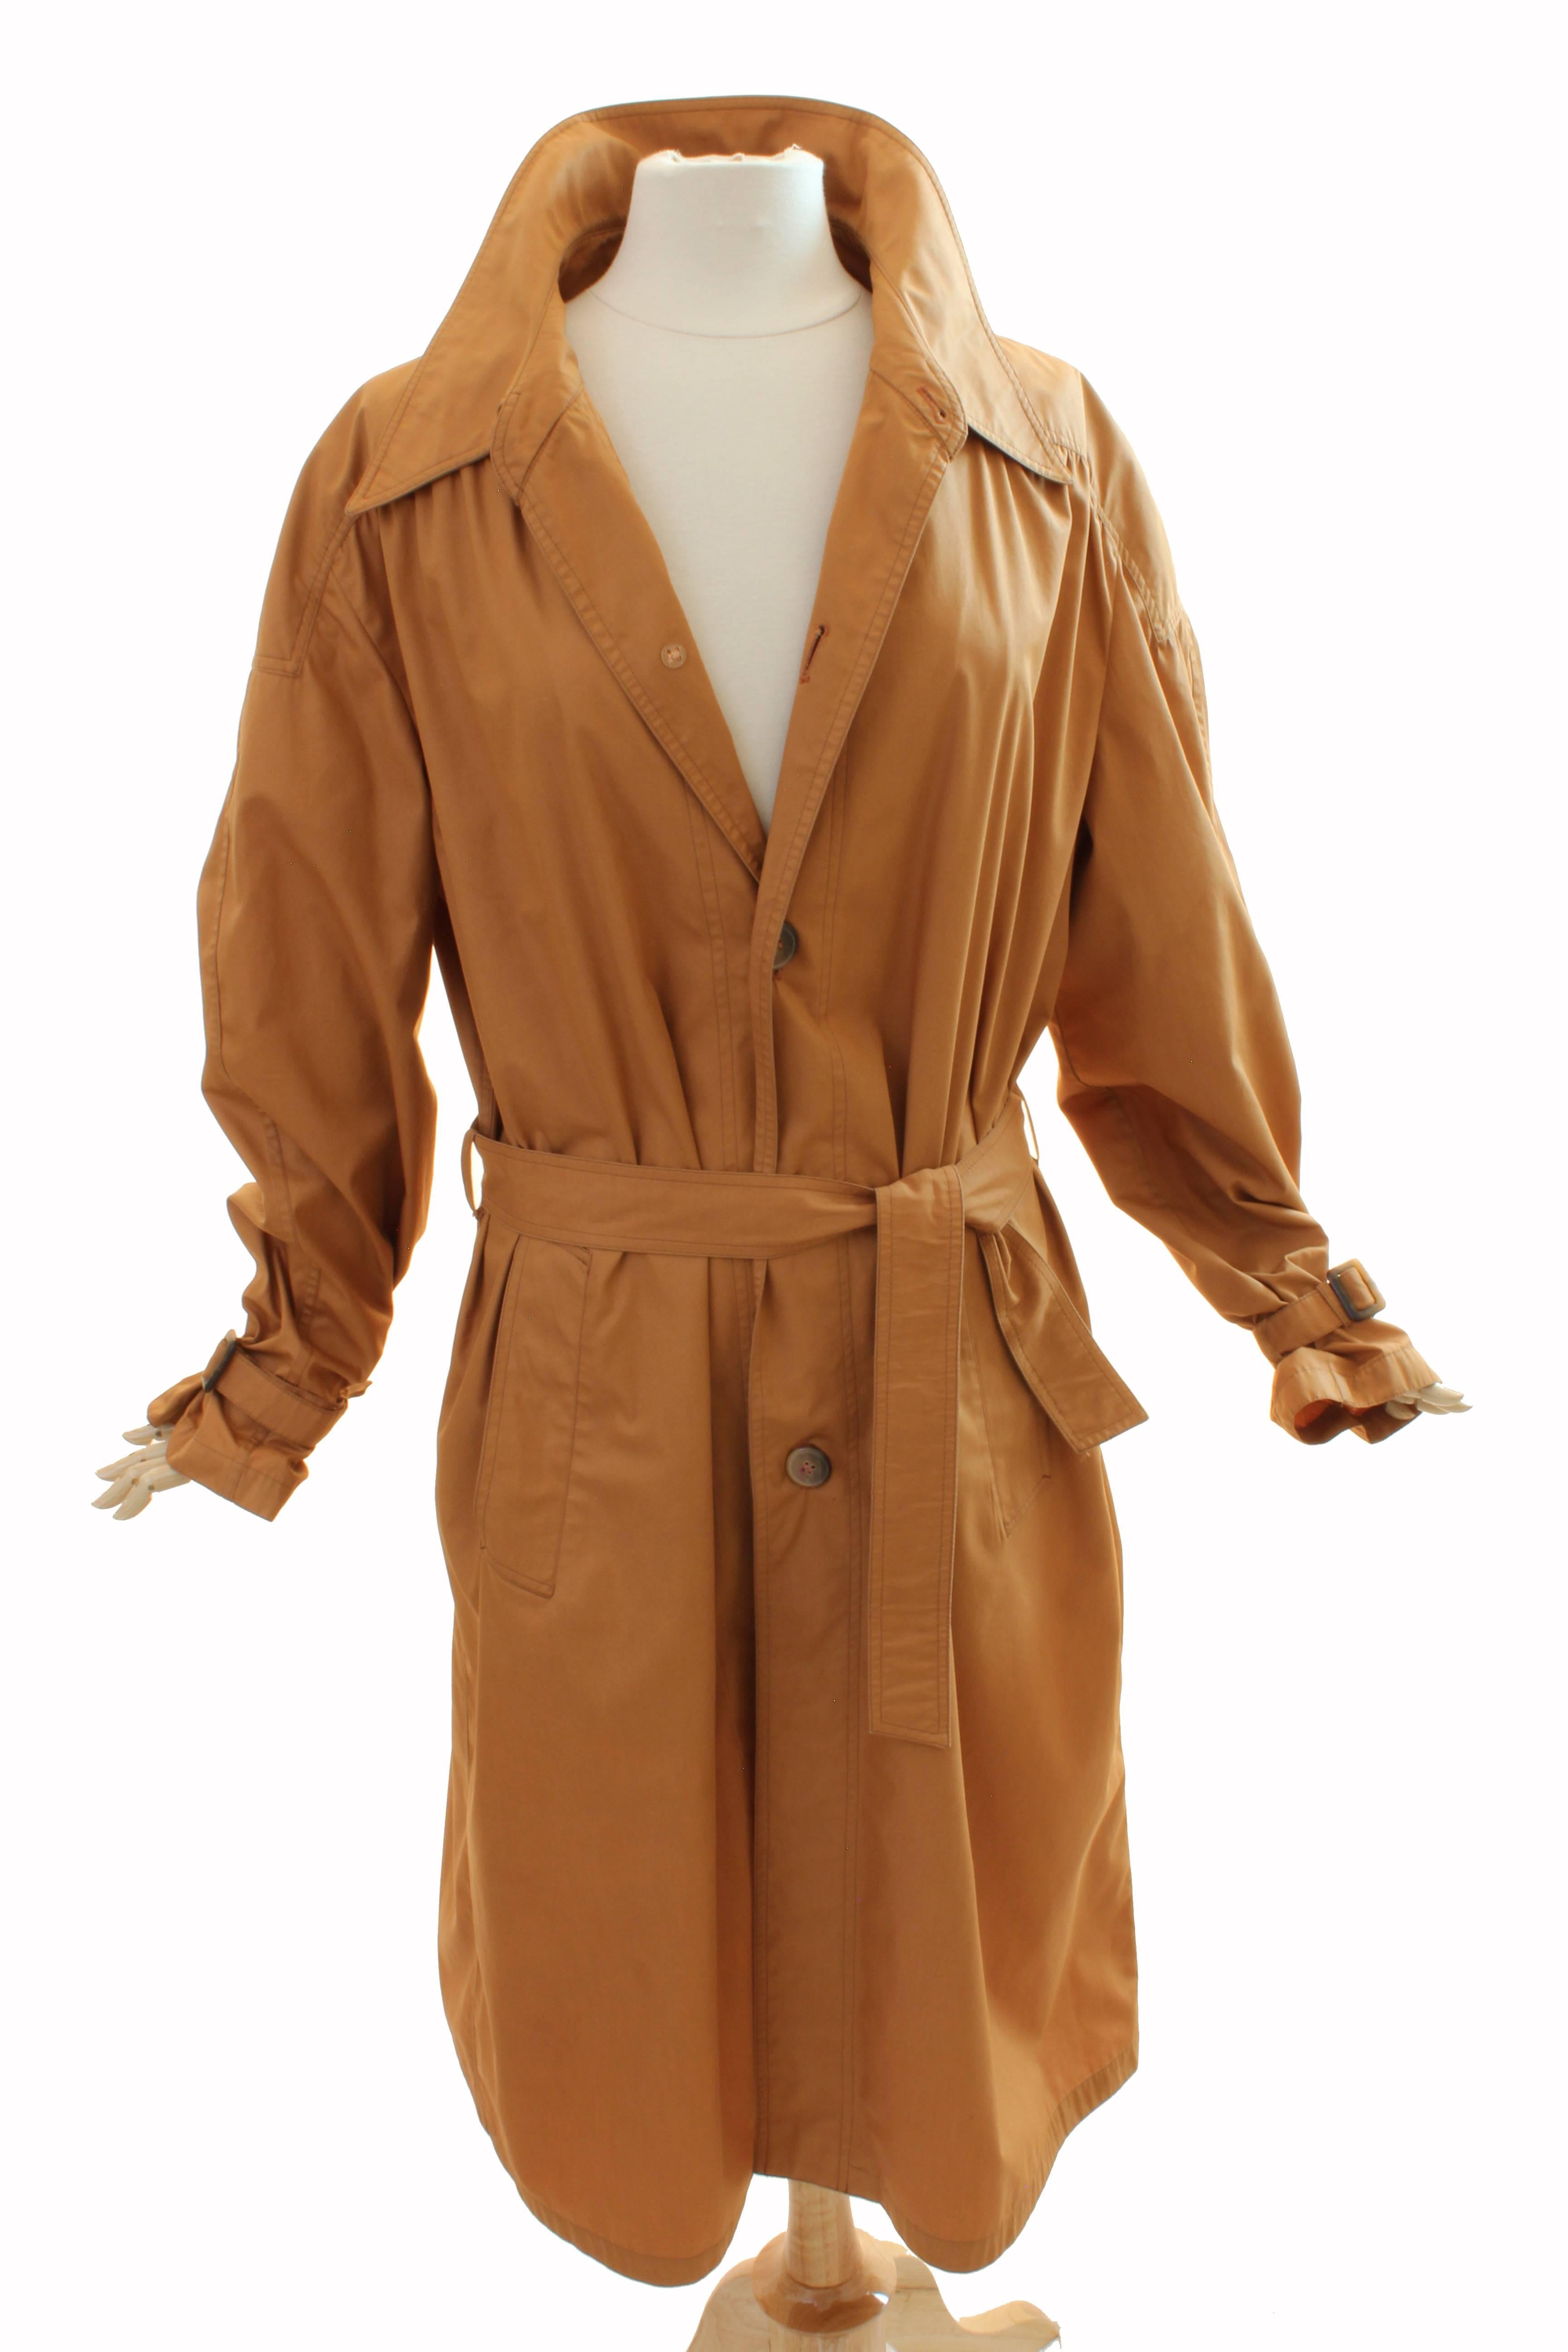 Brown Liberty of London Ladies Trench Coat Made in Italy Size M Vintage 1950s